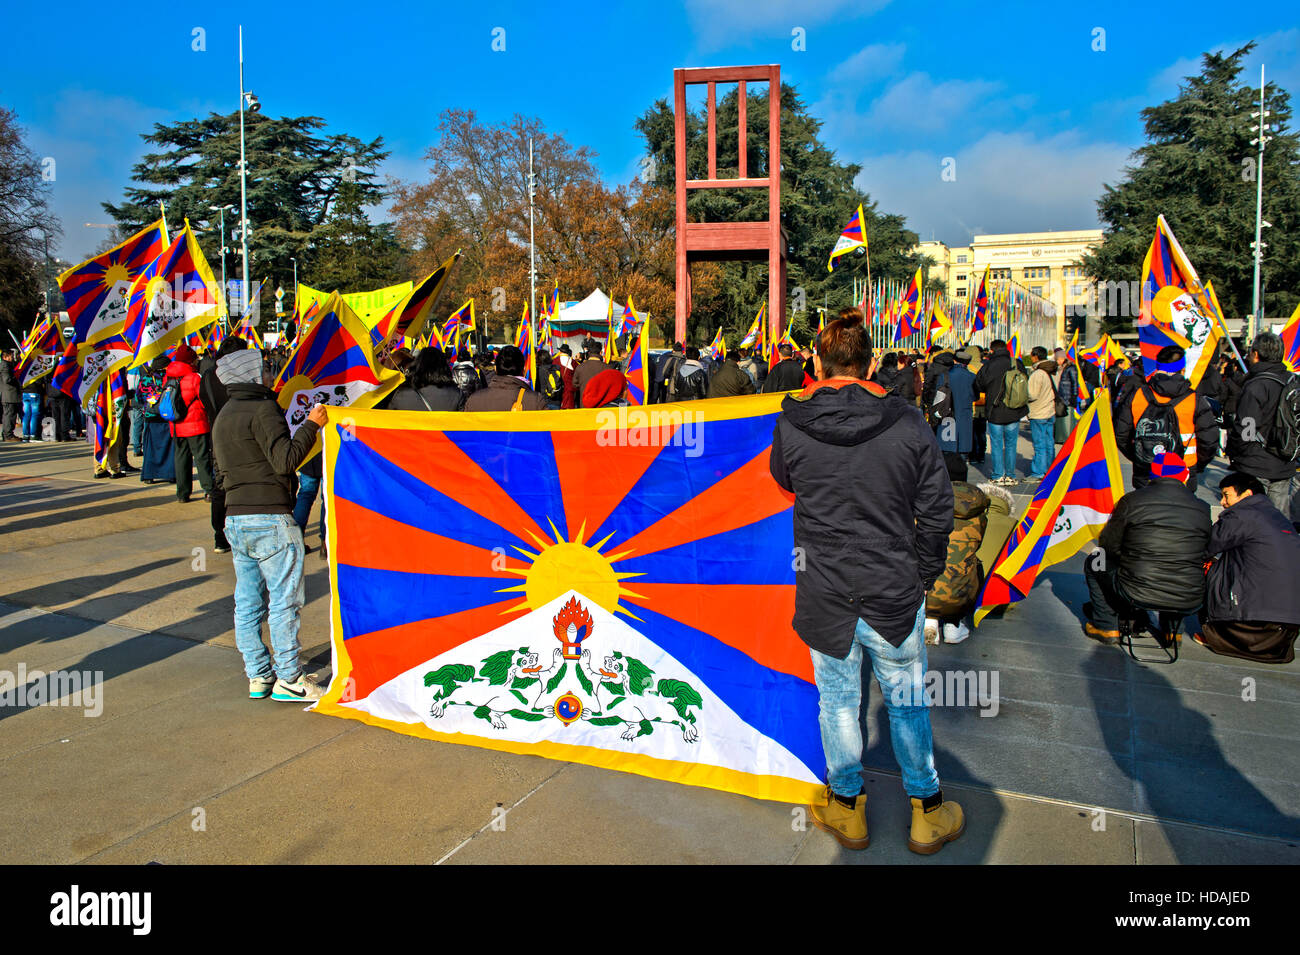 Geneva, Switzerland. 10 December 2016. On the occasion of the Human Rights Day 2016 and in commemoration of the 27th anniversary of the conferment of the Nobel Peace Prize to the Dalai Lama, members of the Tibetan Community in Switzerland and Liechtenstein gather on 10 December 2016 in Geneva, Switzerland, on the Place des Nations in front of the United Nations European headquarters for a protest rally against human rights violations in Tibet, Geneva, Switzerland. Credit: GFC Collection/Alamy Live News Stock Photo